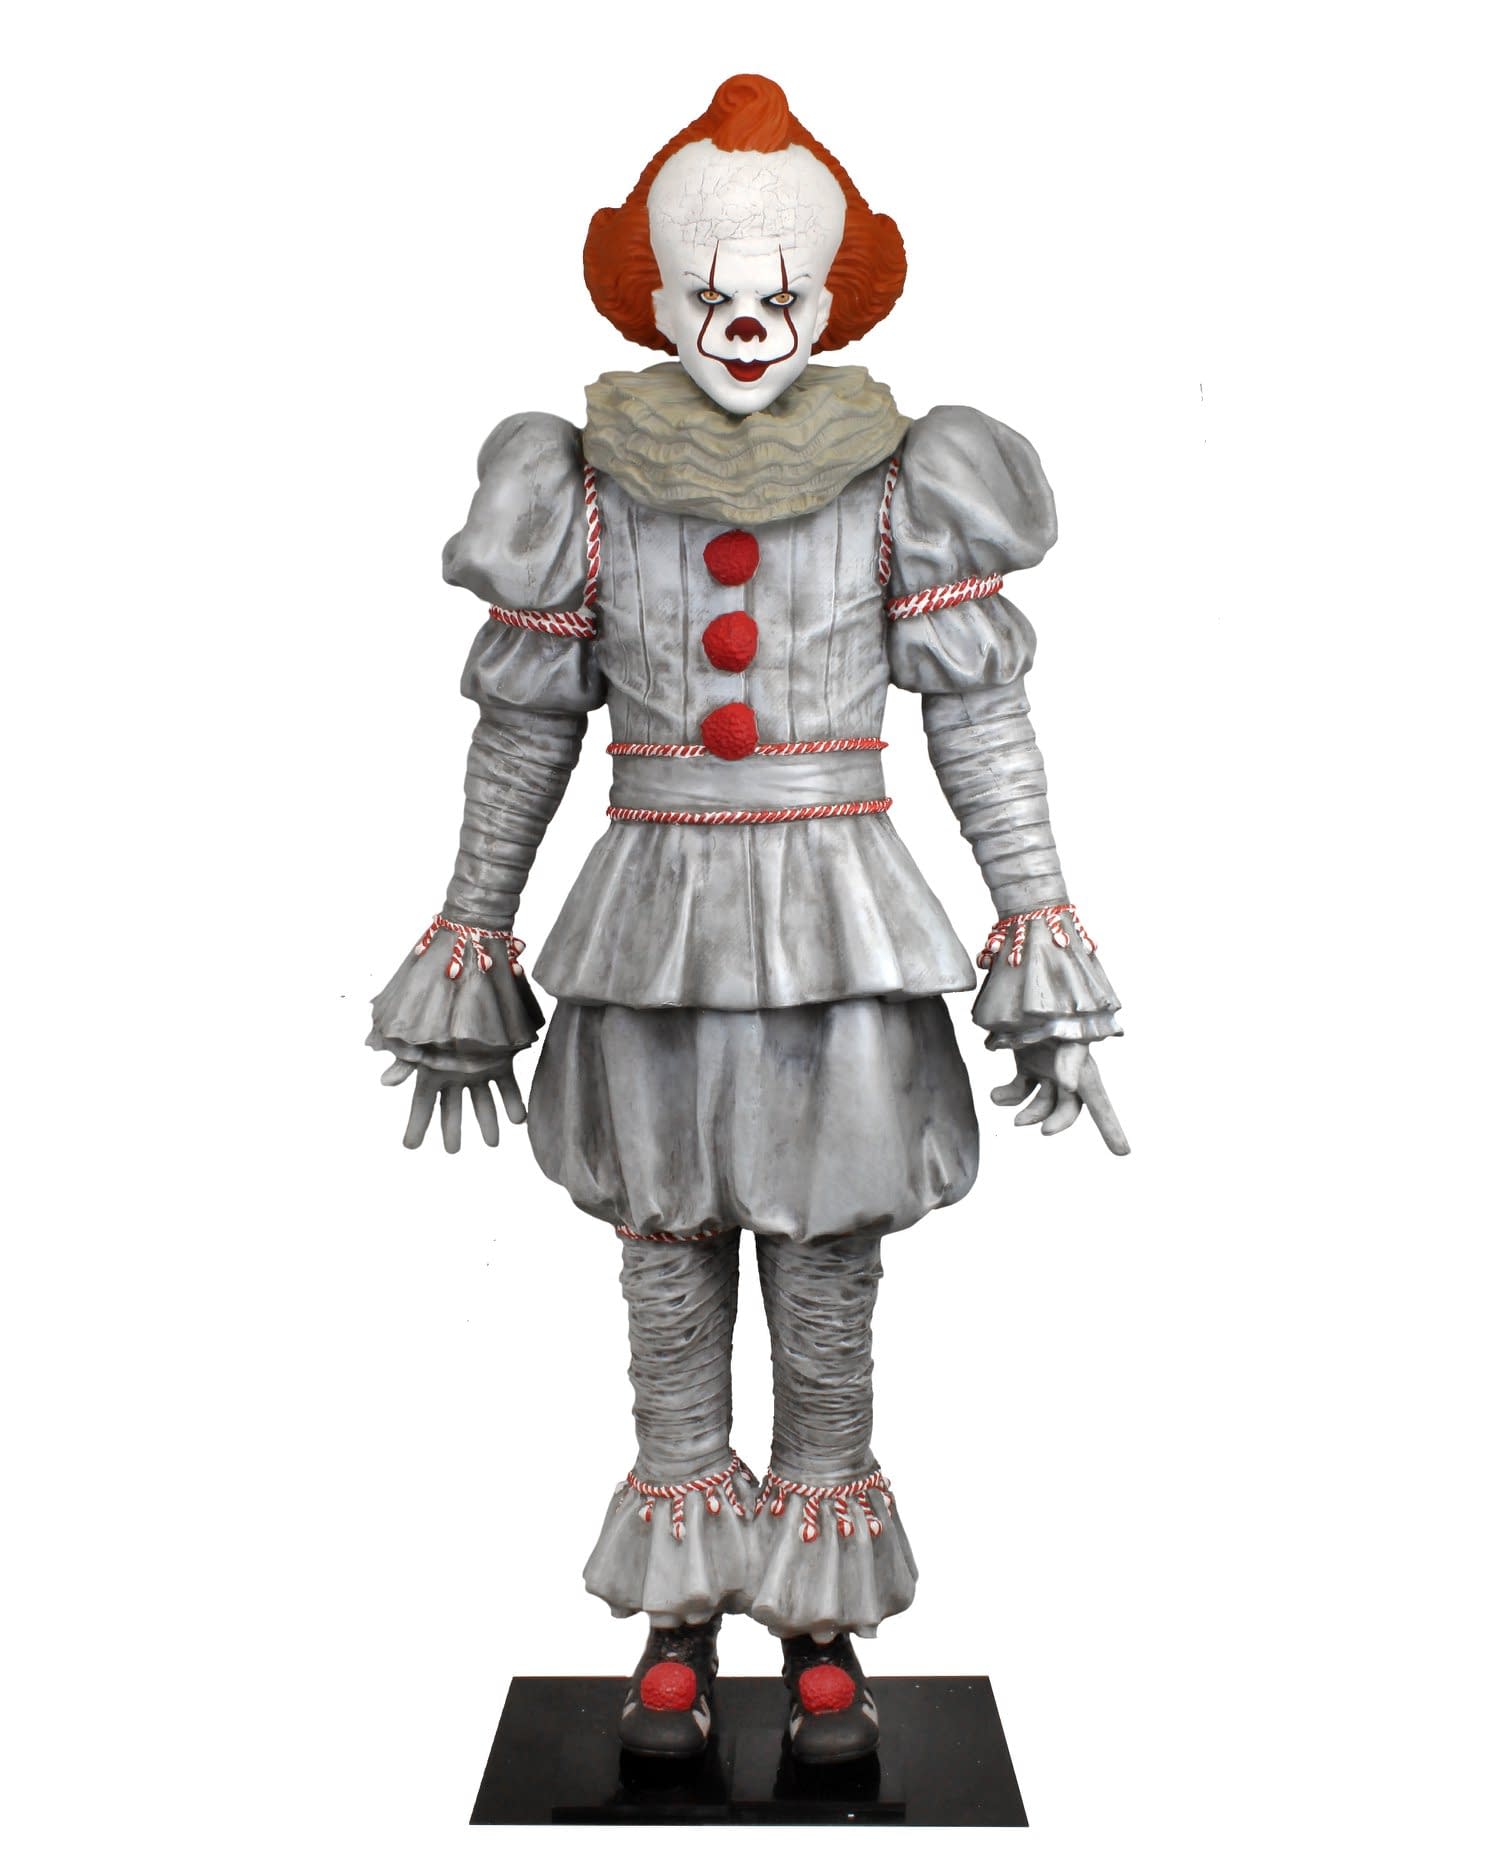 Bring home the life-size murder clown Pennywise by NECA 